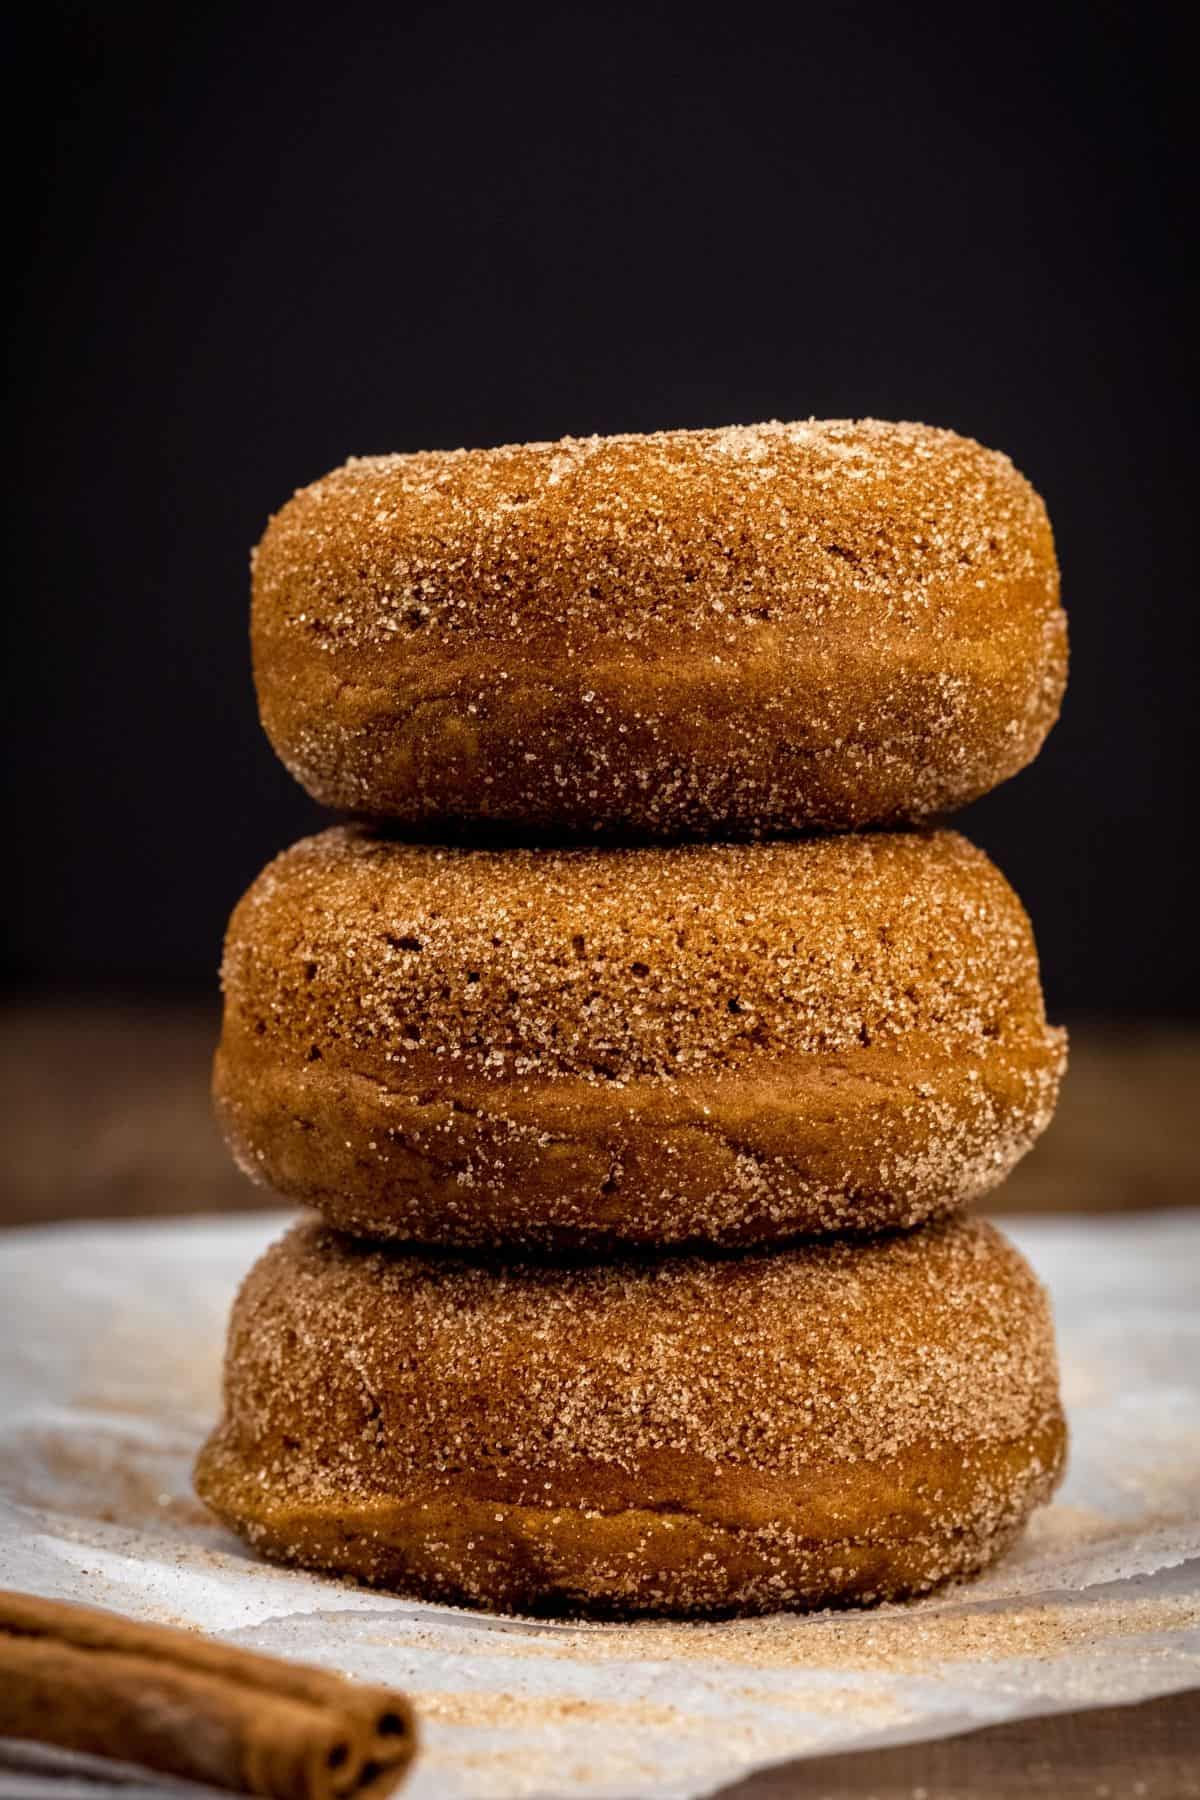 a stack of 3 donuts on top of each other on white parchment paper in front of a black background. a single cinnamon stick is next to the donuts.